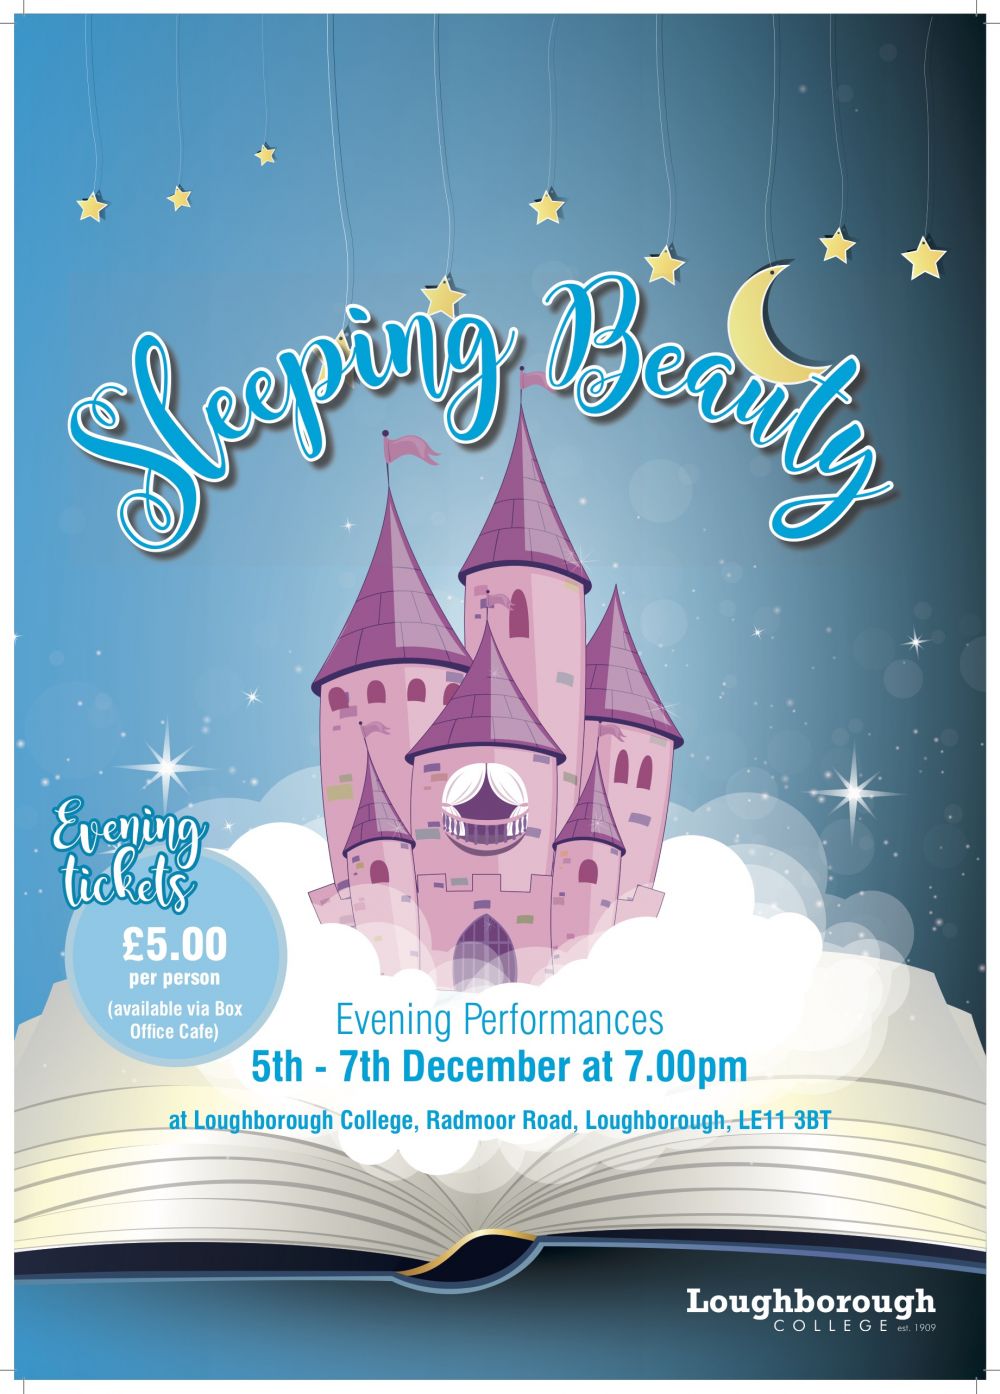 Panto set to delight with family fairytale favourite at Loughborough College